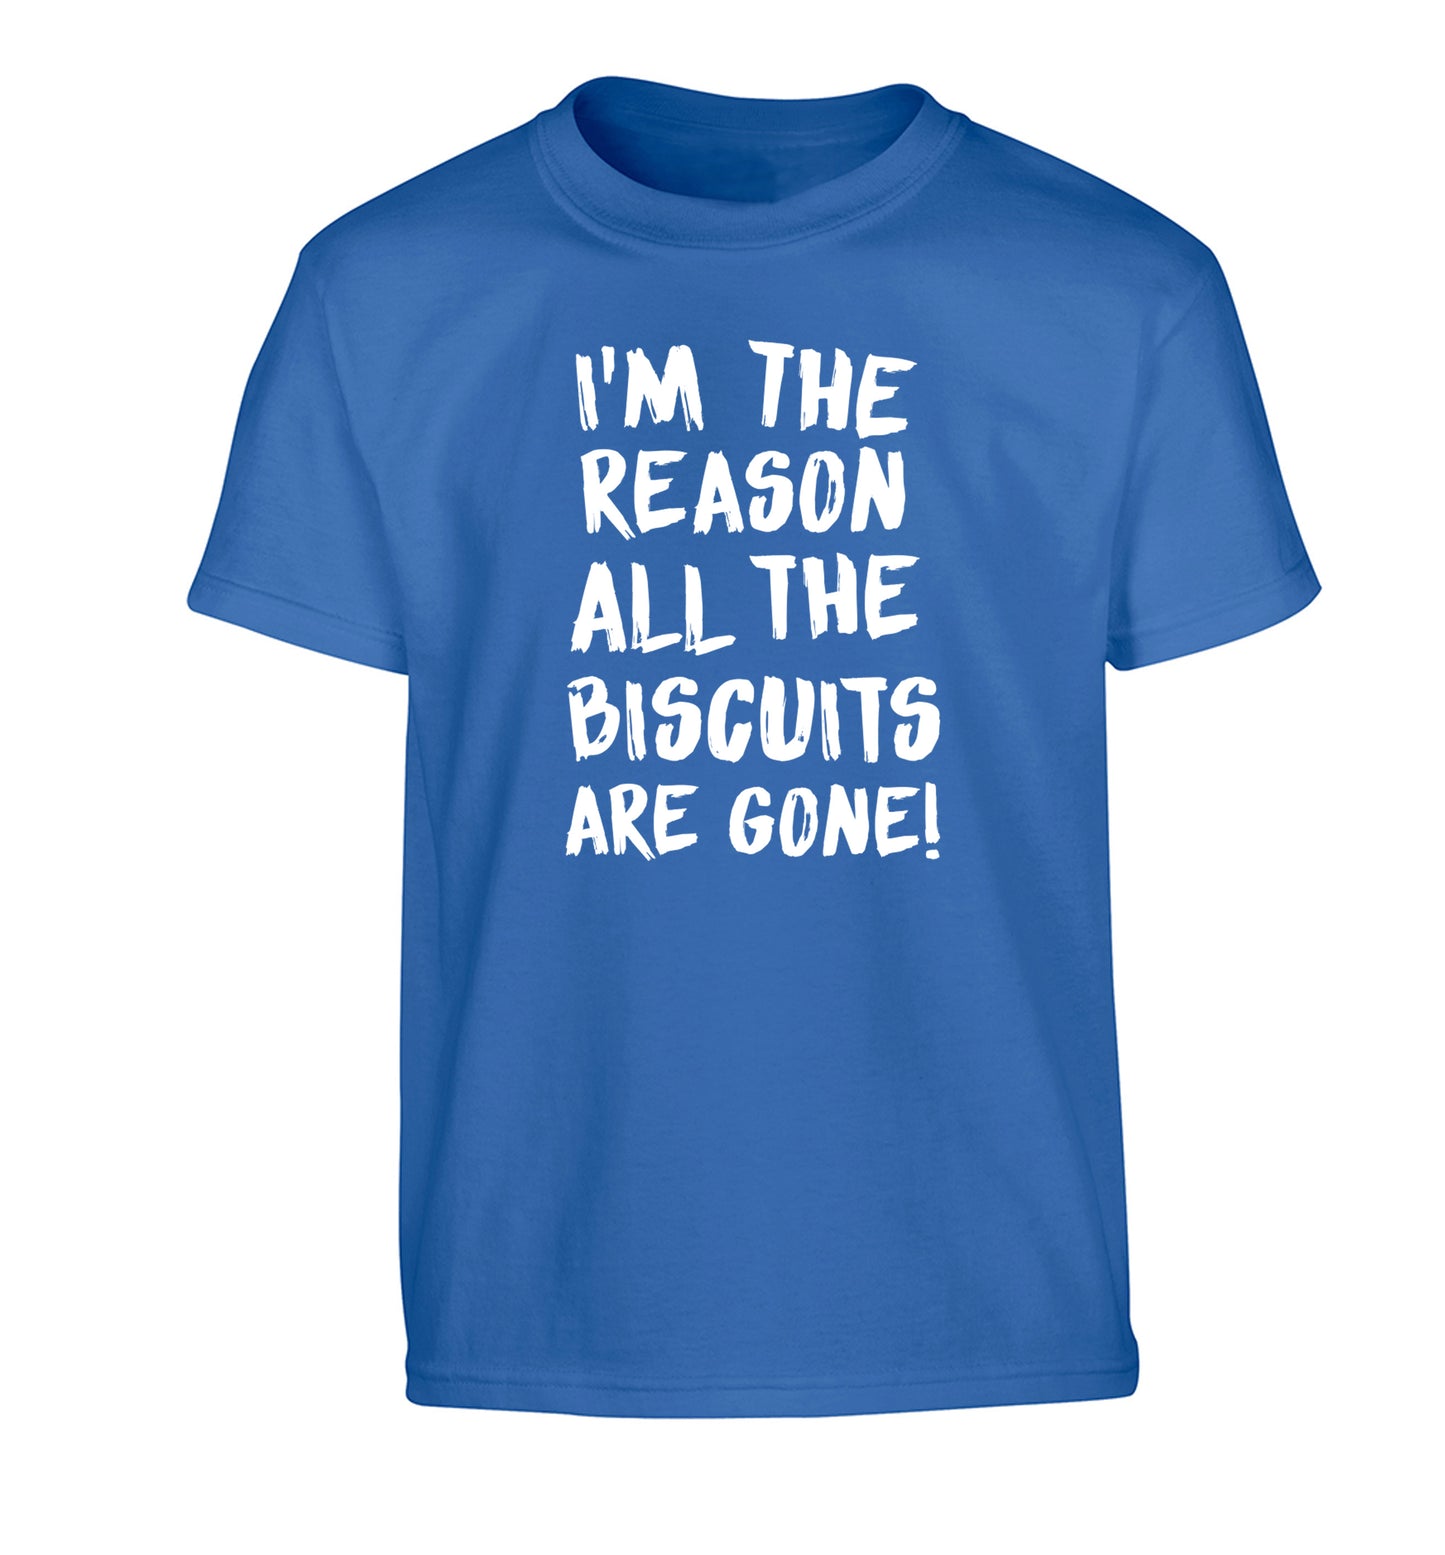 I'm the reason why all the biscuits are gone Children's blue Tshirt 12-13 Years